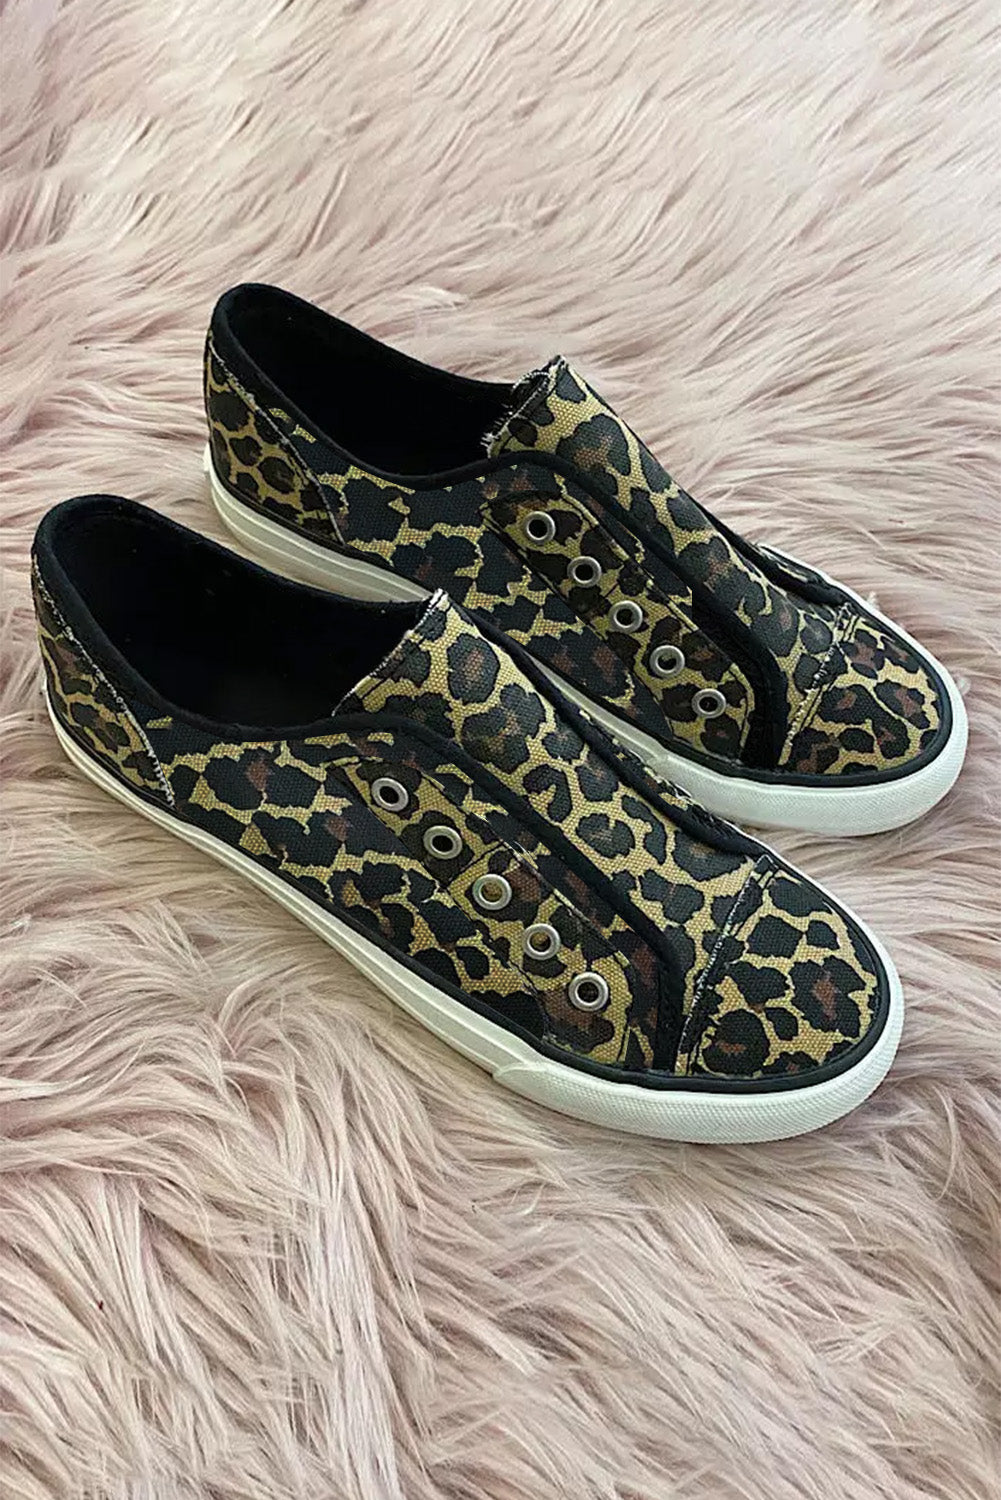 Leopard Slip-on Round Toe Canvas Sneakers